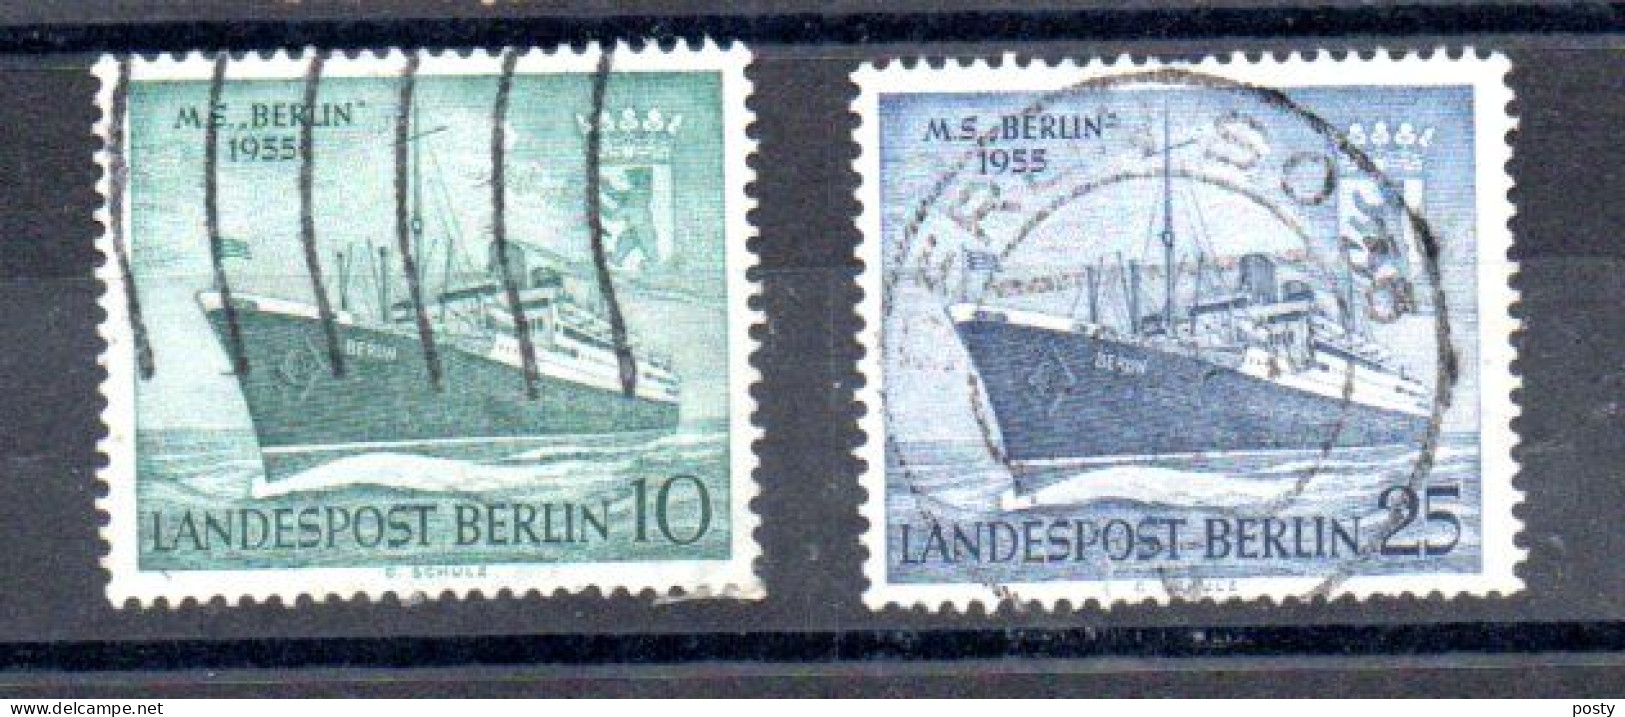 ALLEMAGNE - GERMANY - BERLIN - 1955 - M.S BERLIN - PAQUEBOT - SCHIFF - OCEANLINER - 10 + 25 - Oblitéré - Used - - Used Stamps